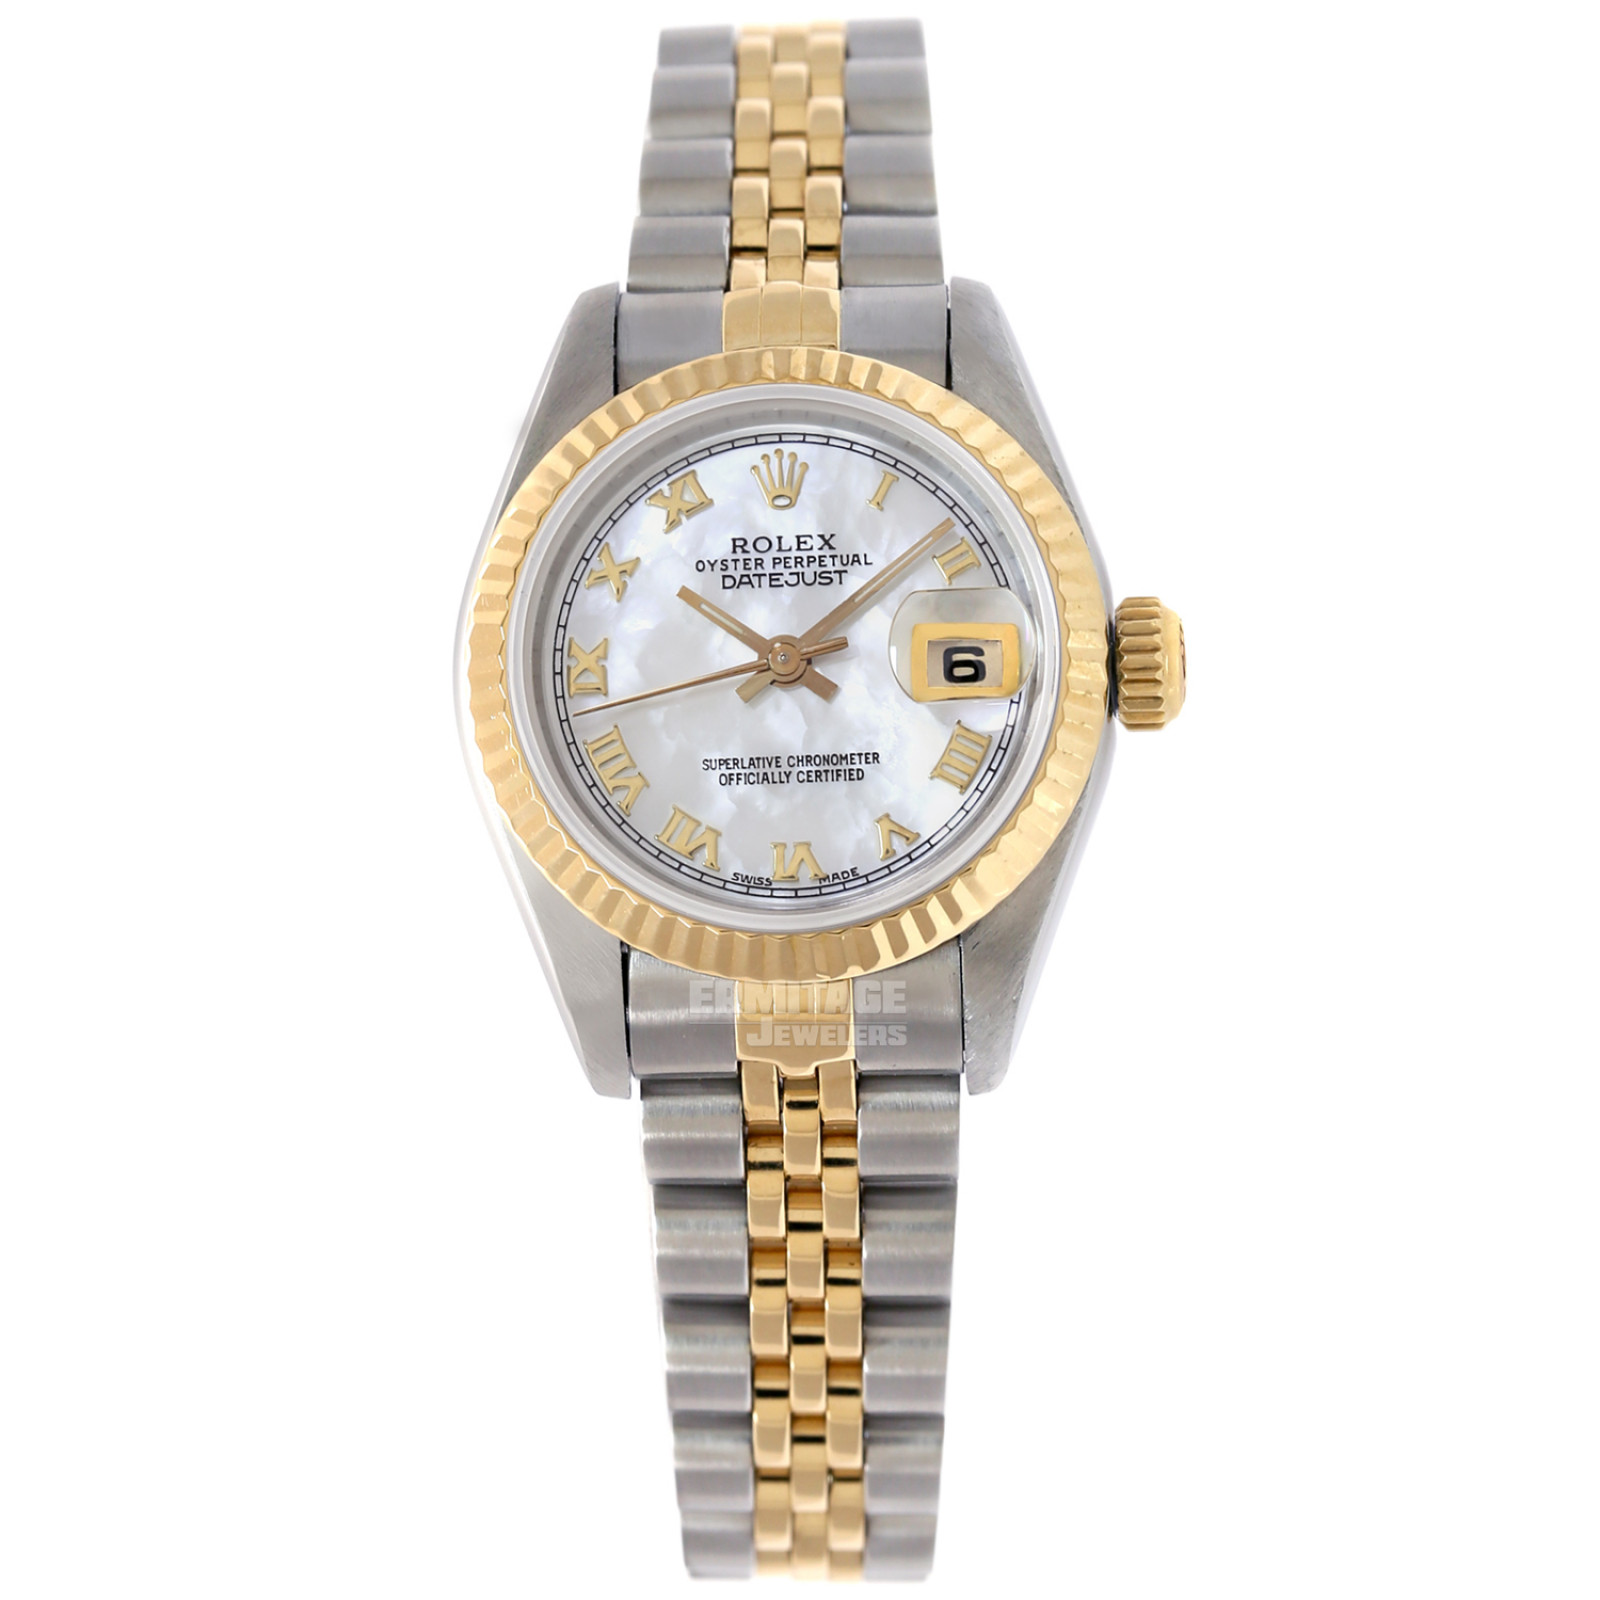 26 mm Rolex Datejust 69173 Gold & Steel on Jubilee with White Dial